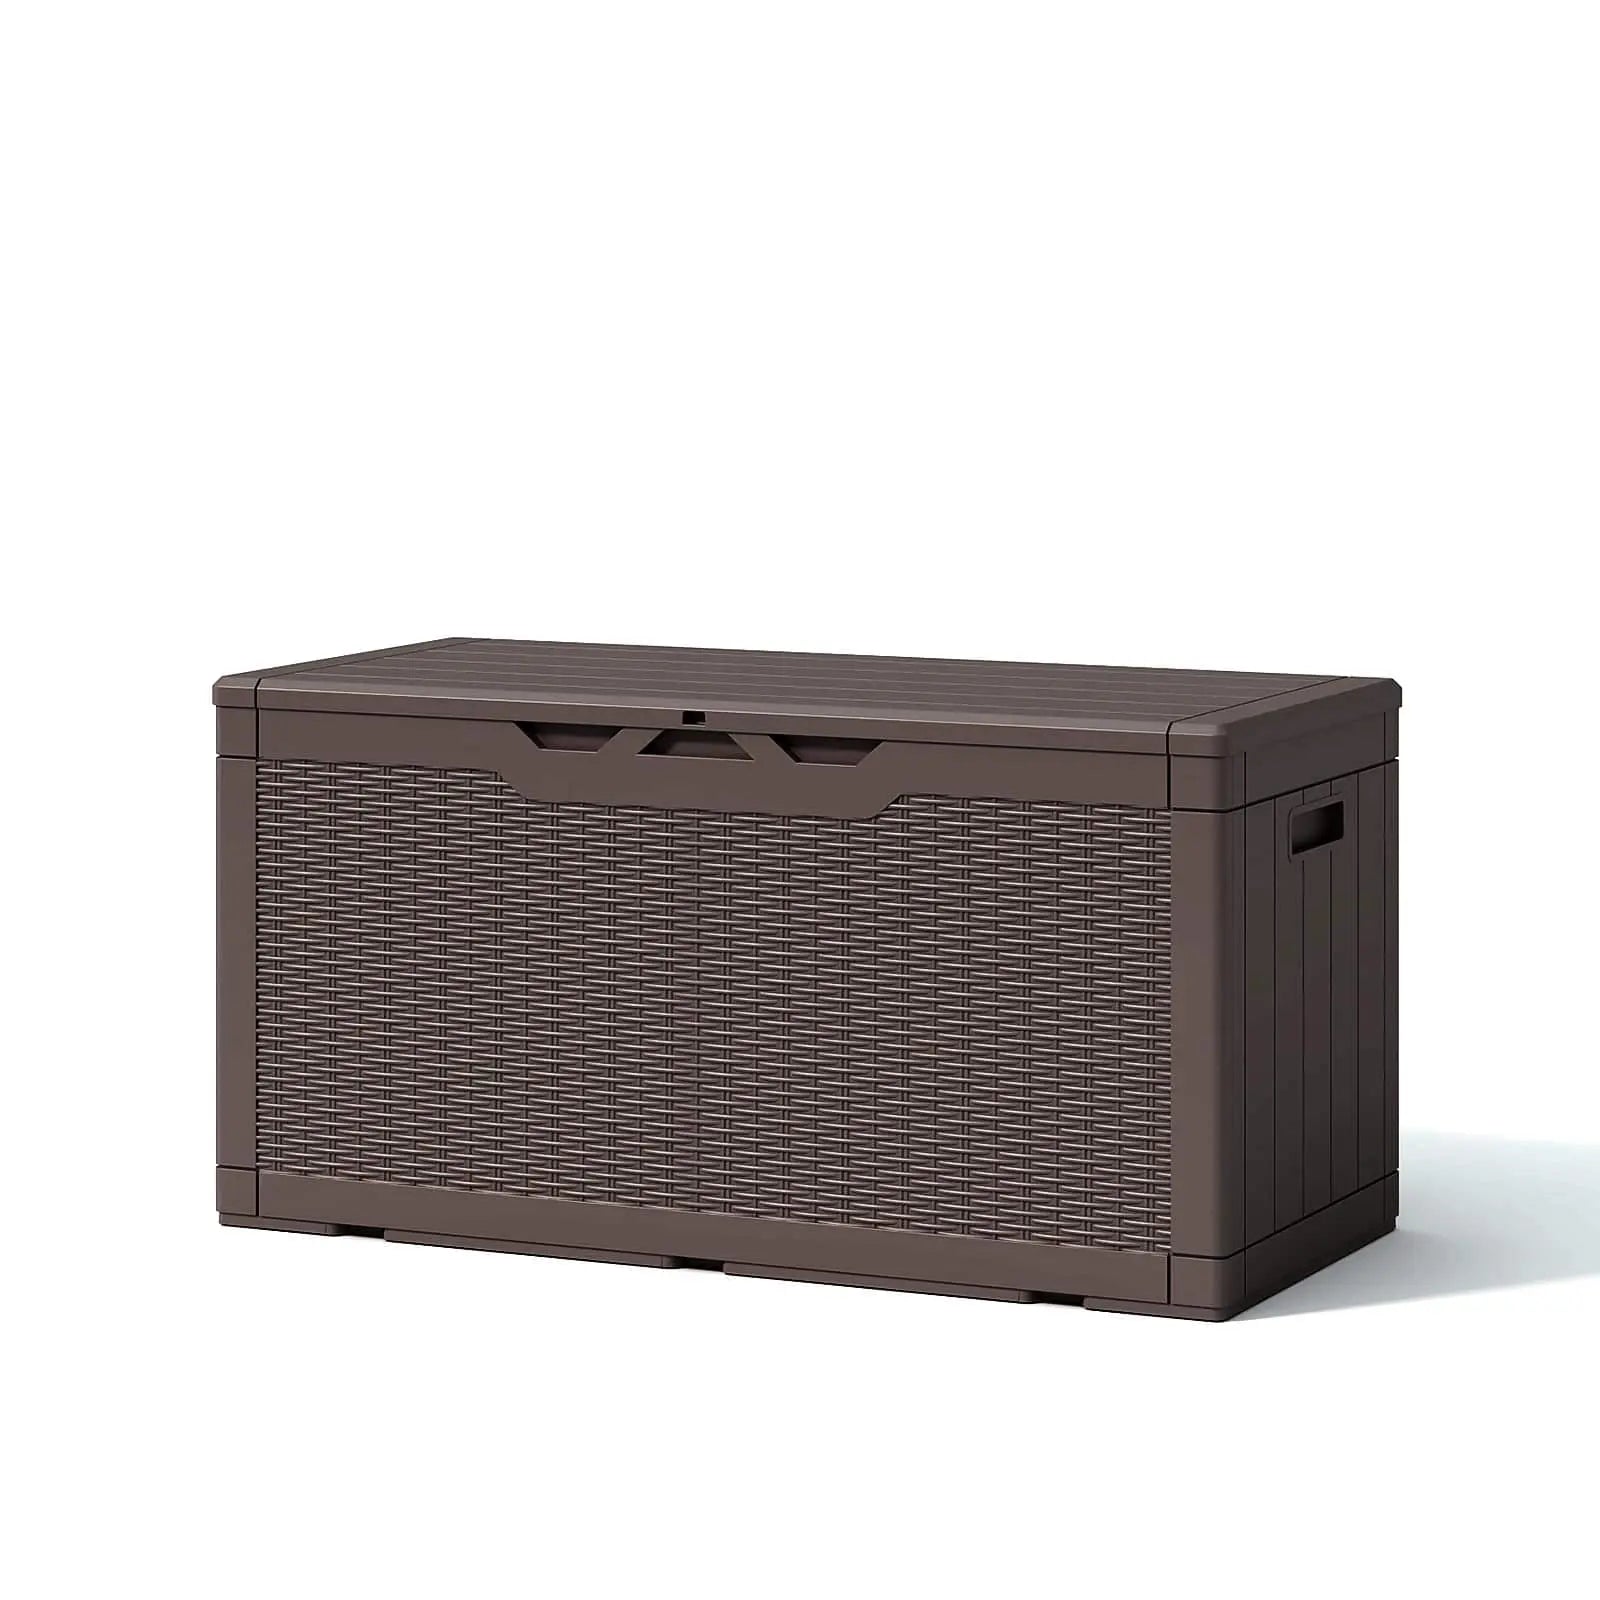 The 100 gallon ourdoor storage deck box in coffee brown color